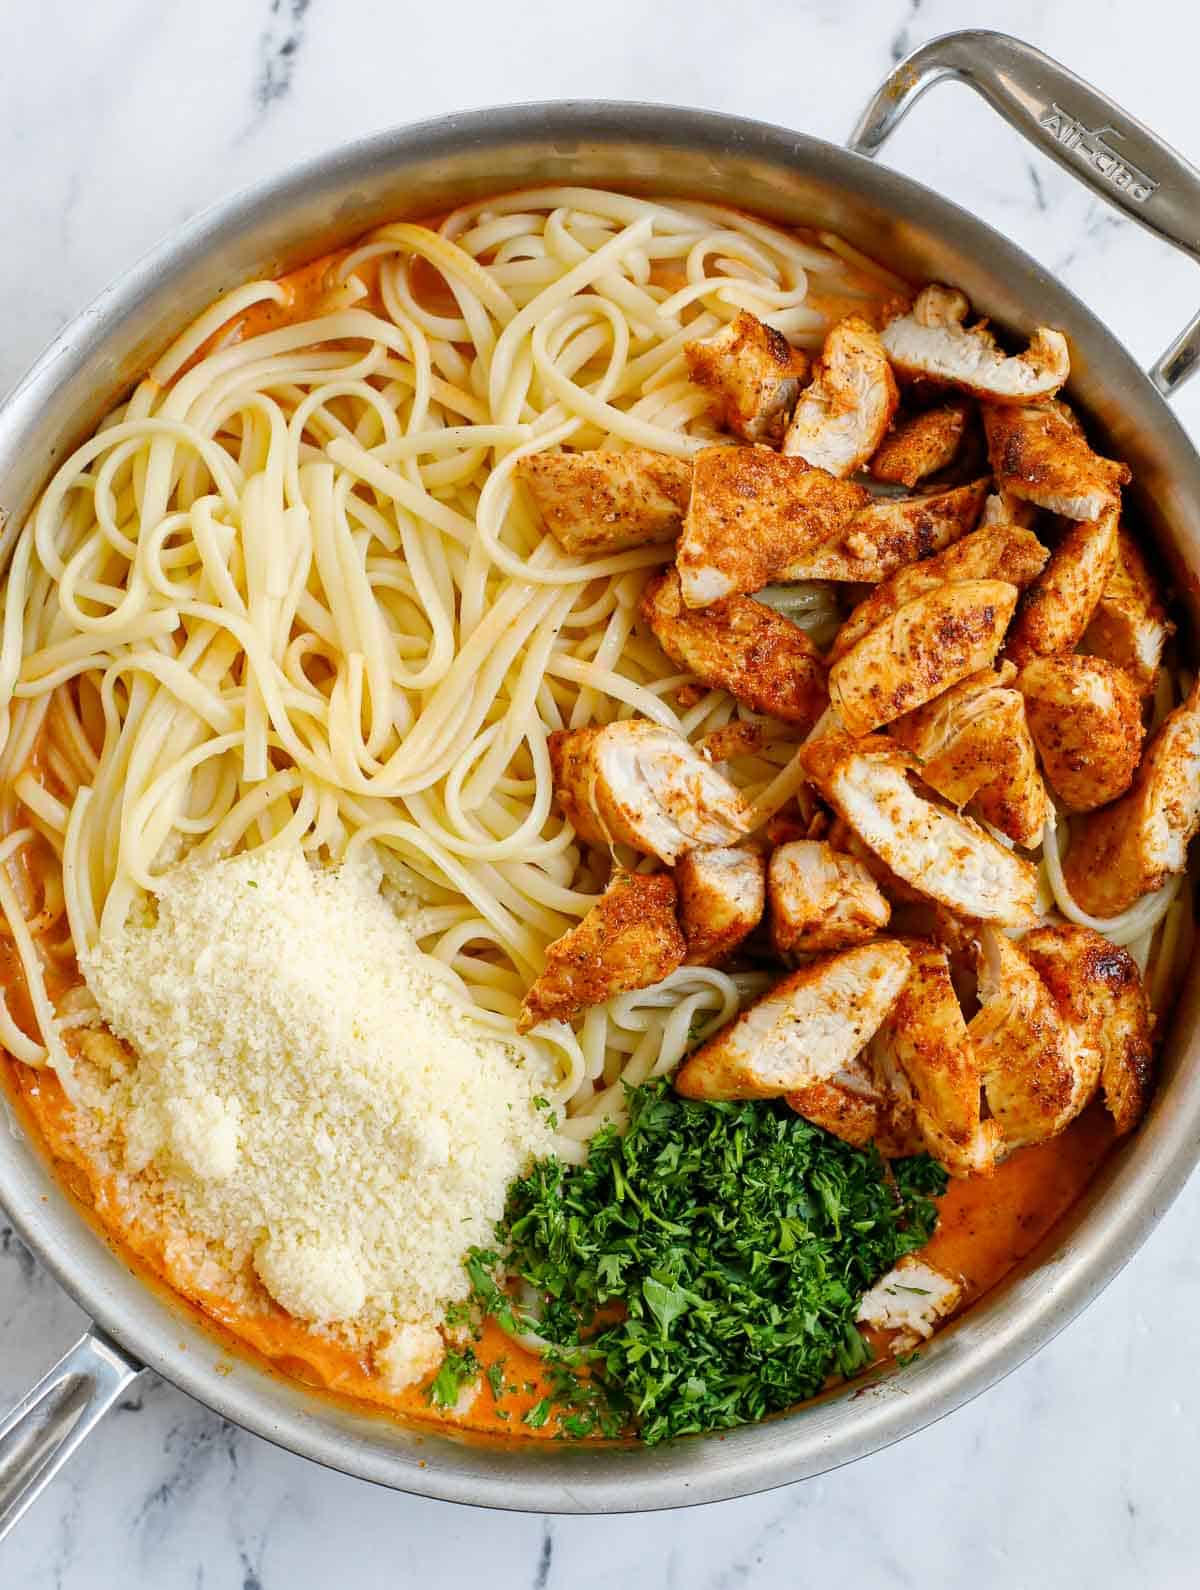 Combine pasta and chicken with spicy pasta sauce.